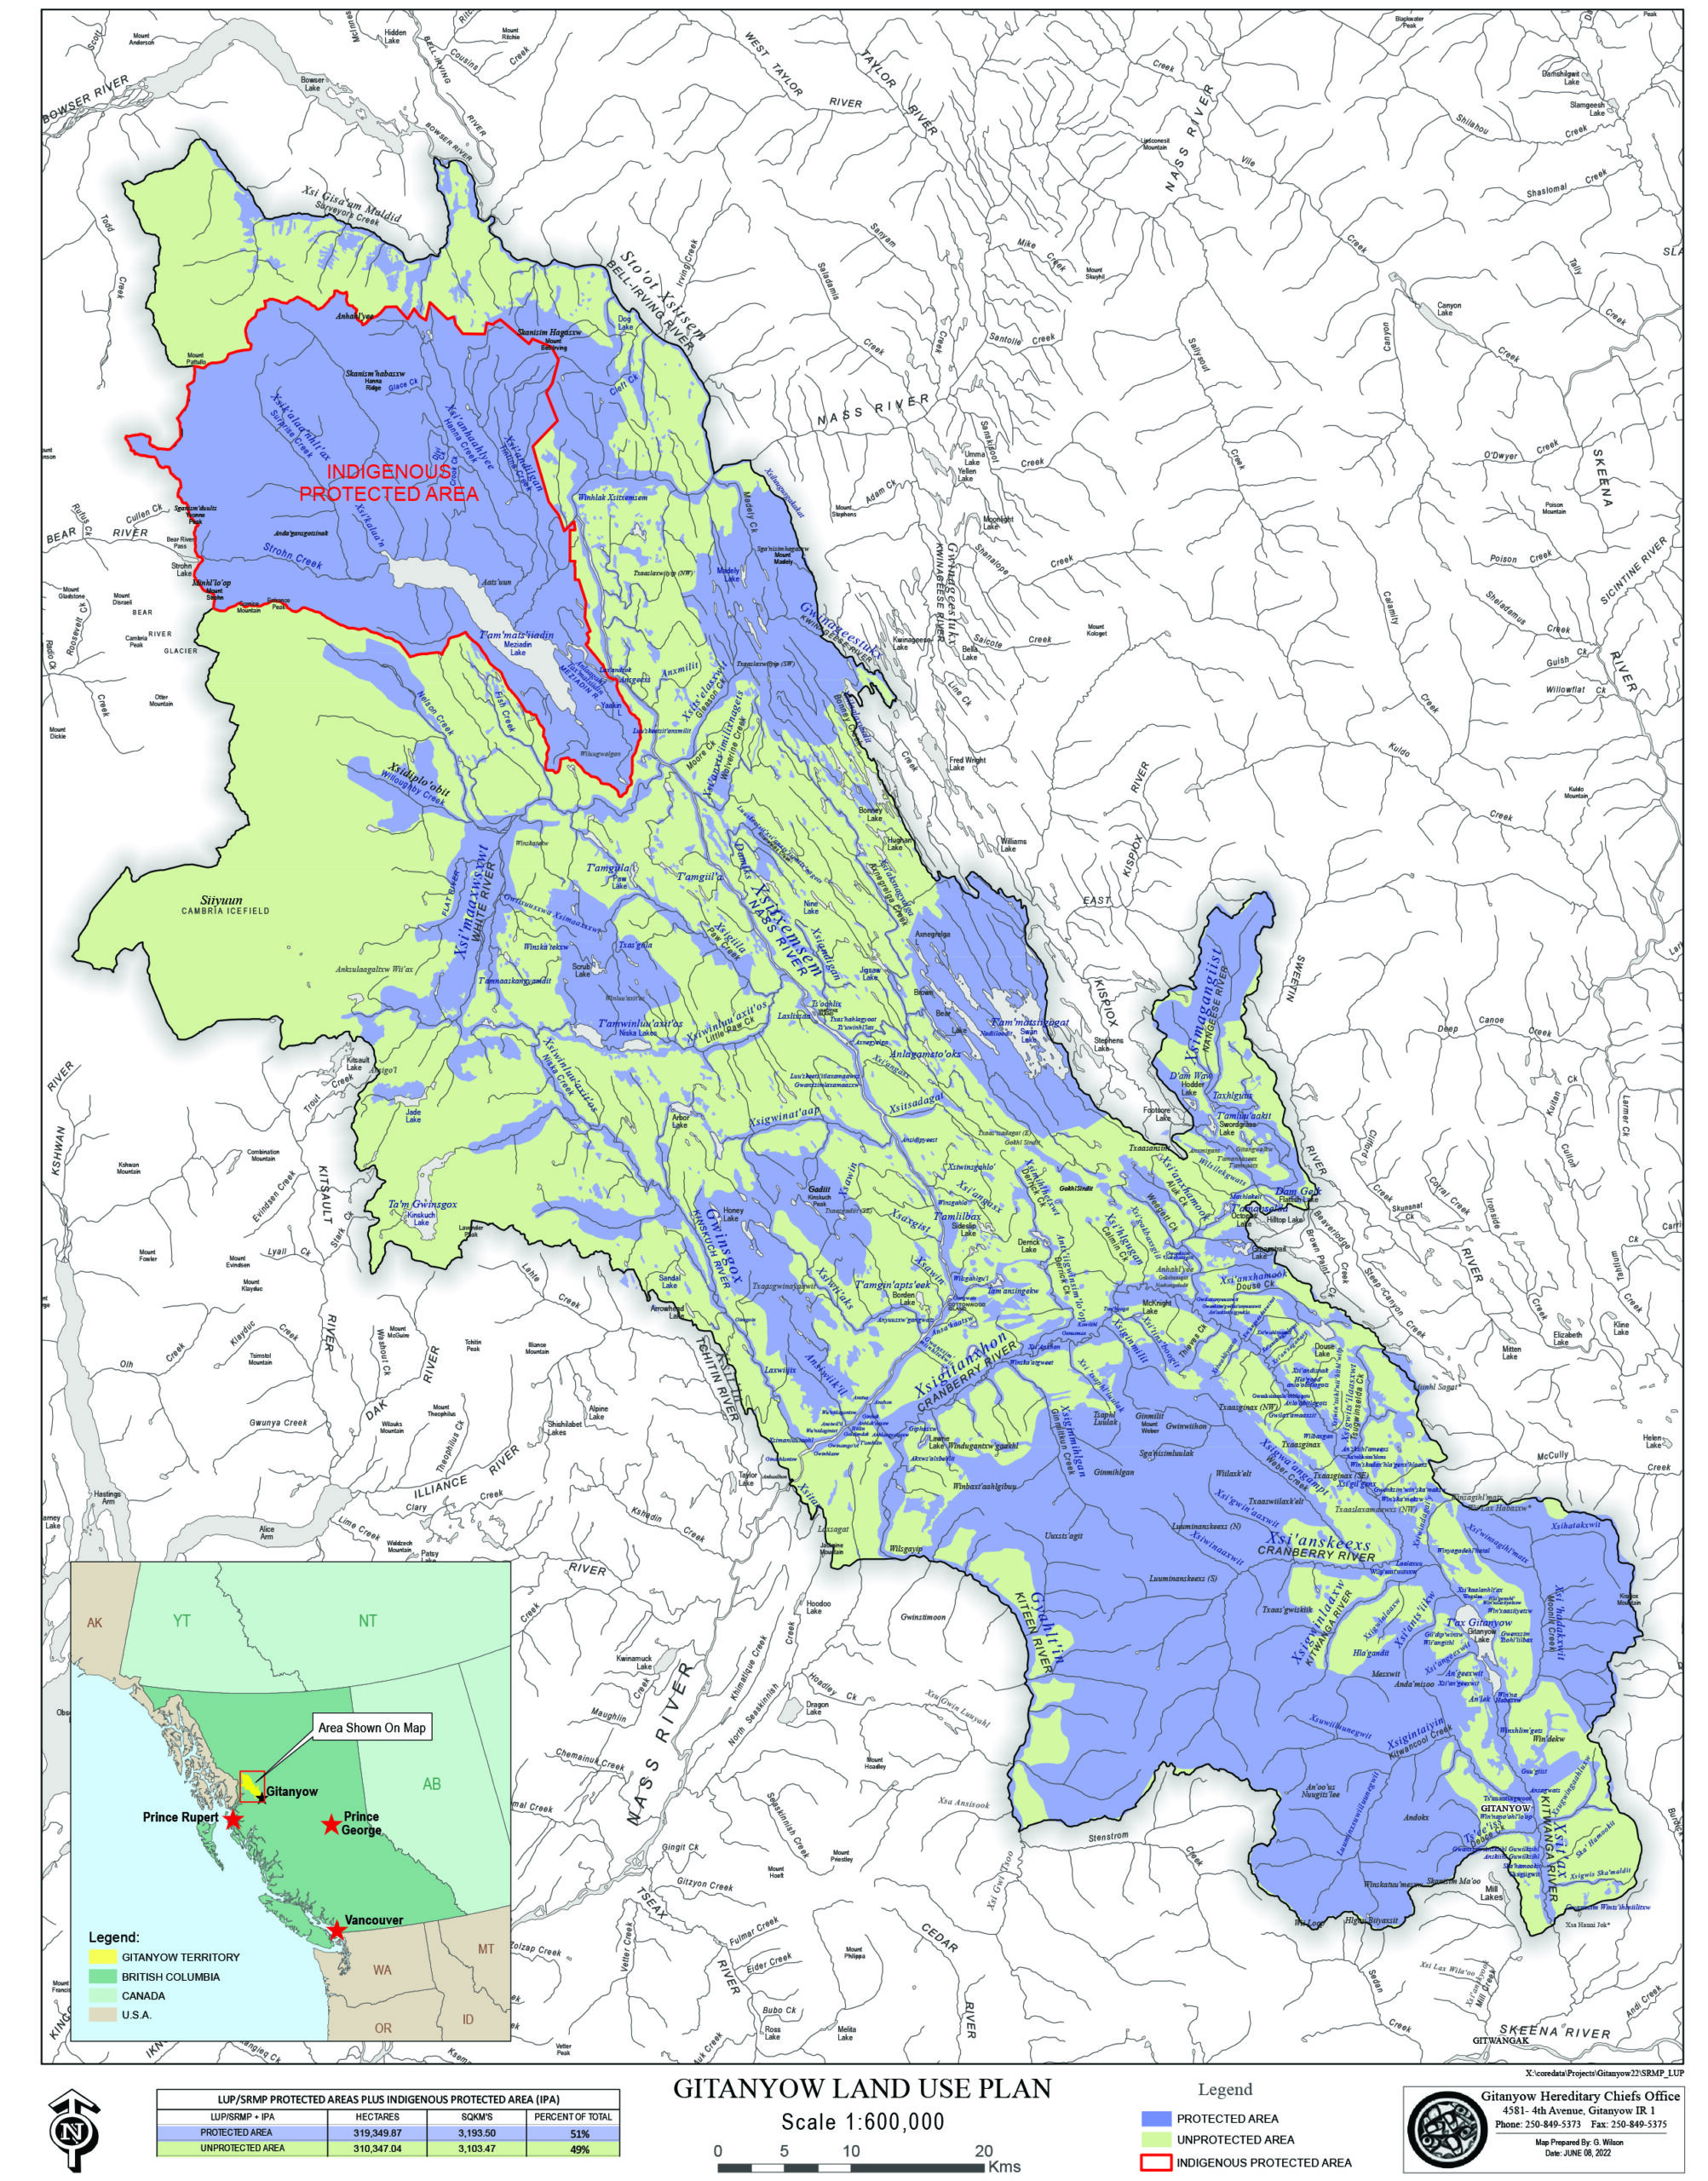 Gitanyow Land Use Plan map showing protected and unprotected areas